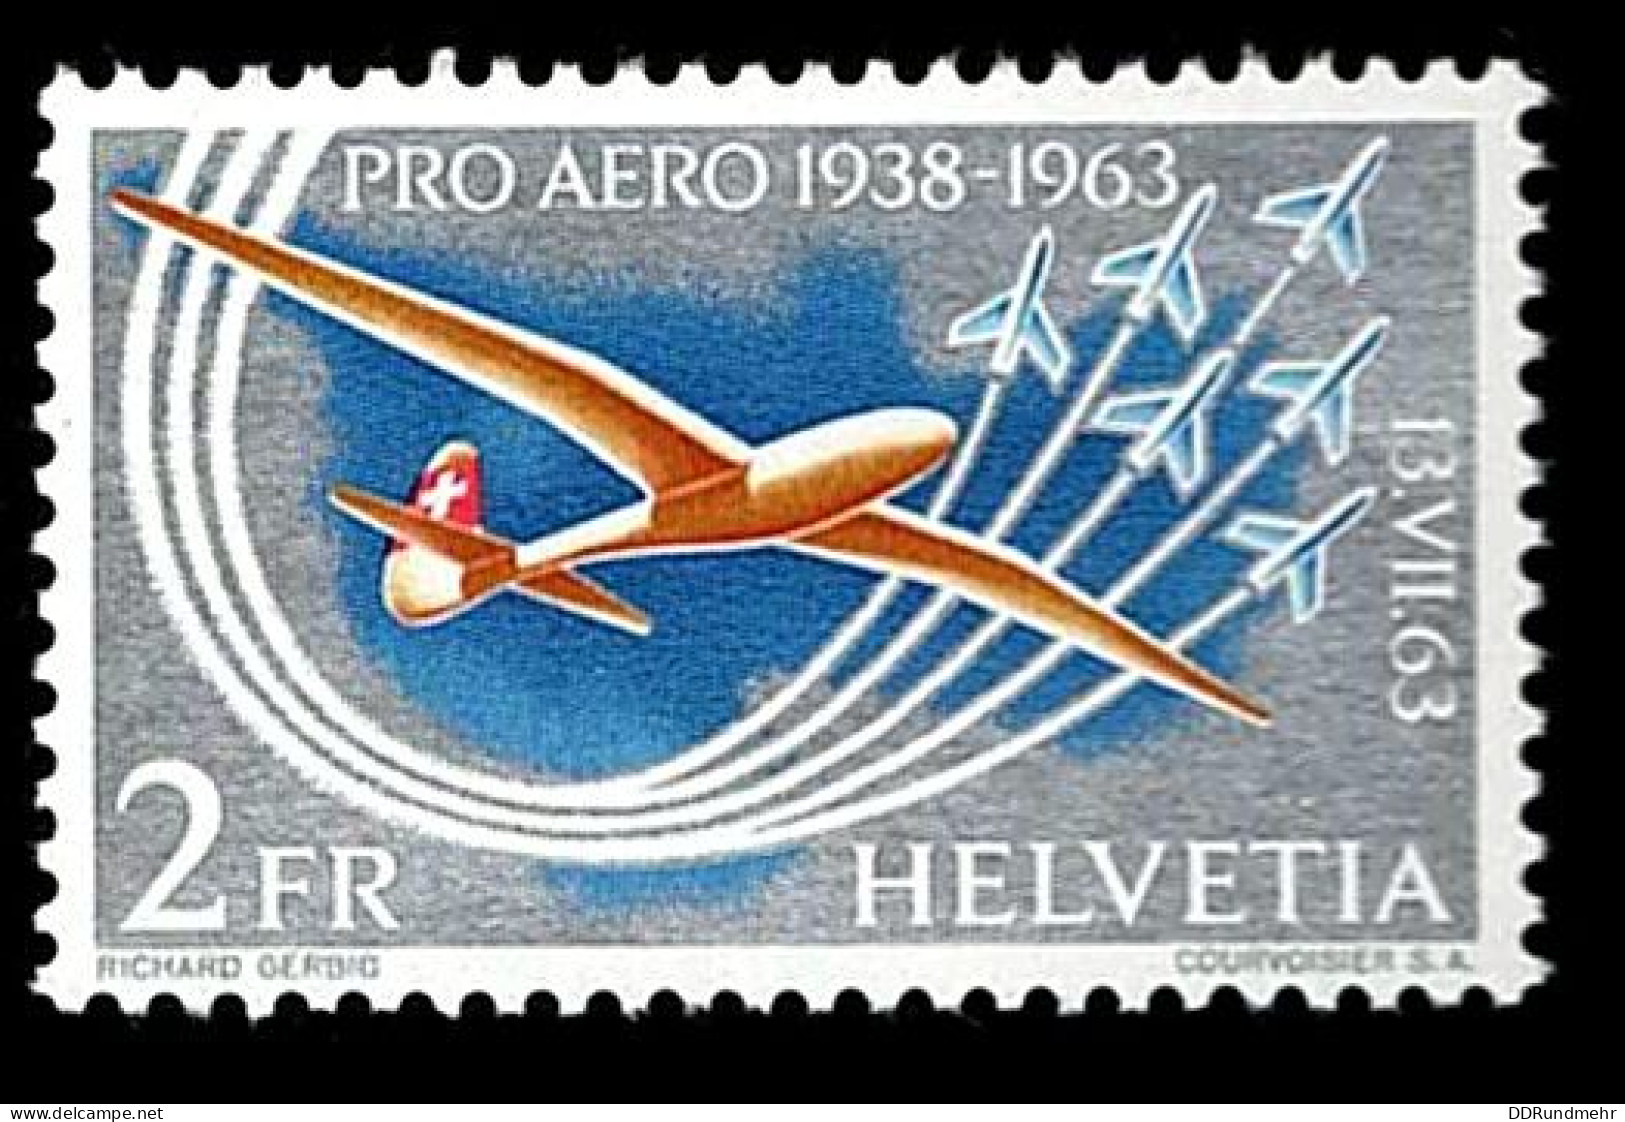 1963 Pro Aero  Michel CH 780 Stamp Number CH C46 Yvert Et Tellier CH PA45 Stanley Gibbons CH 681 Unificato CH A45 Xx MNH - Ungebraucht